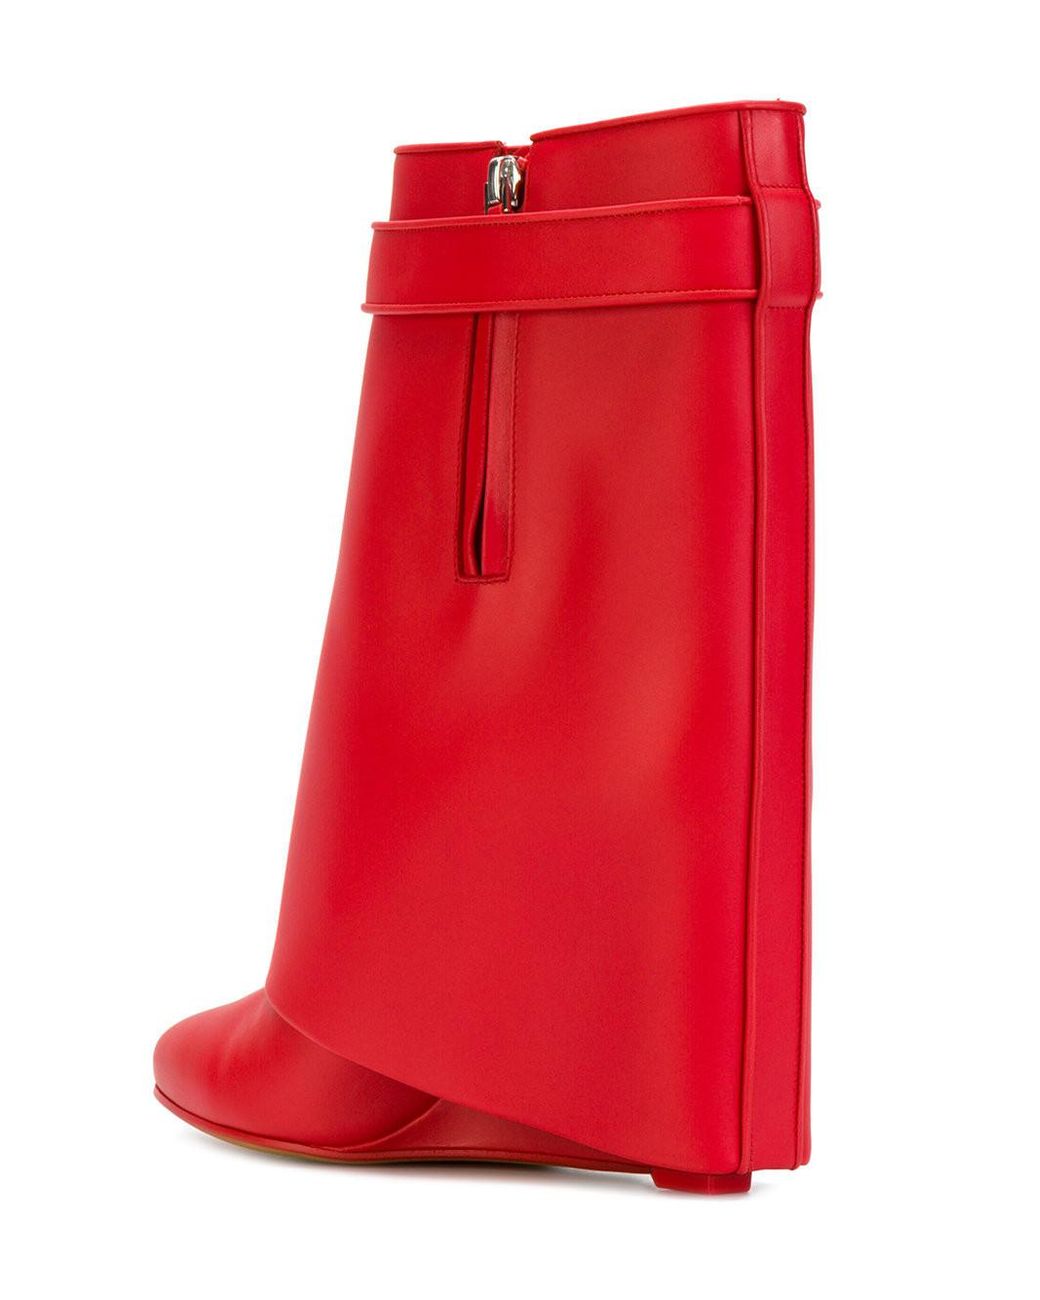 Givenchy Shark Lock Boots in Red | Lyst